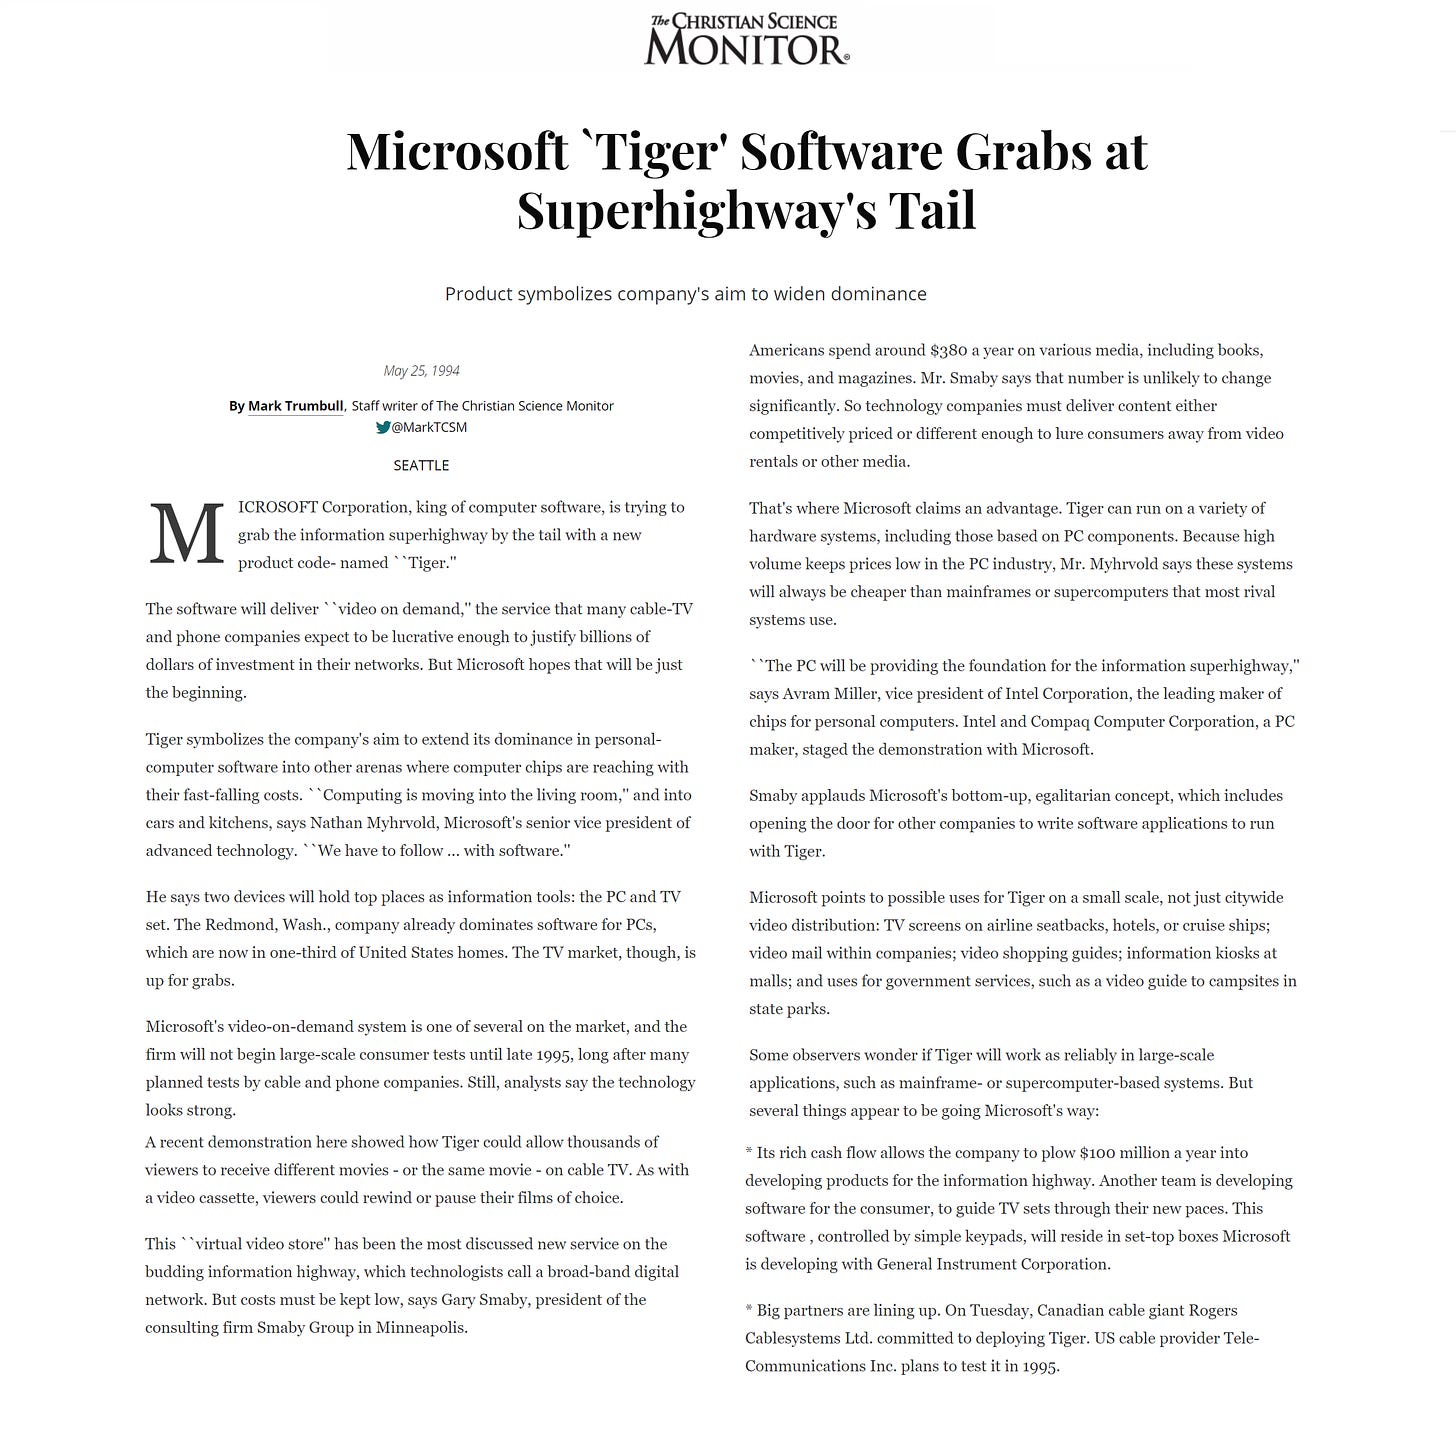 Microsoft 'Tiger' Software grabs at Superhighway's Tail - article from Christian Science Monitor